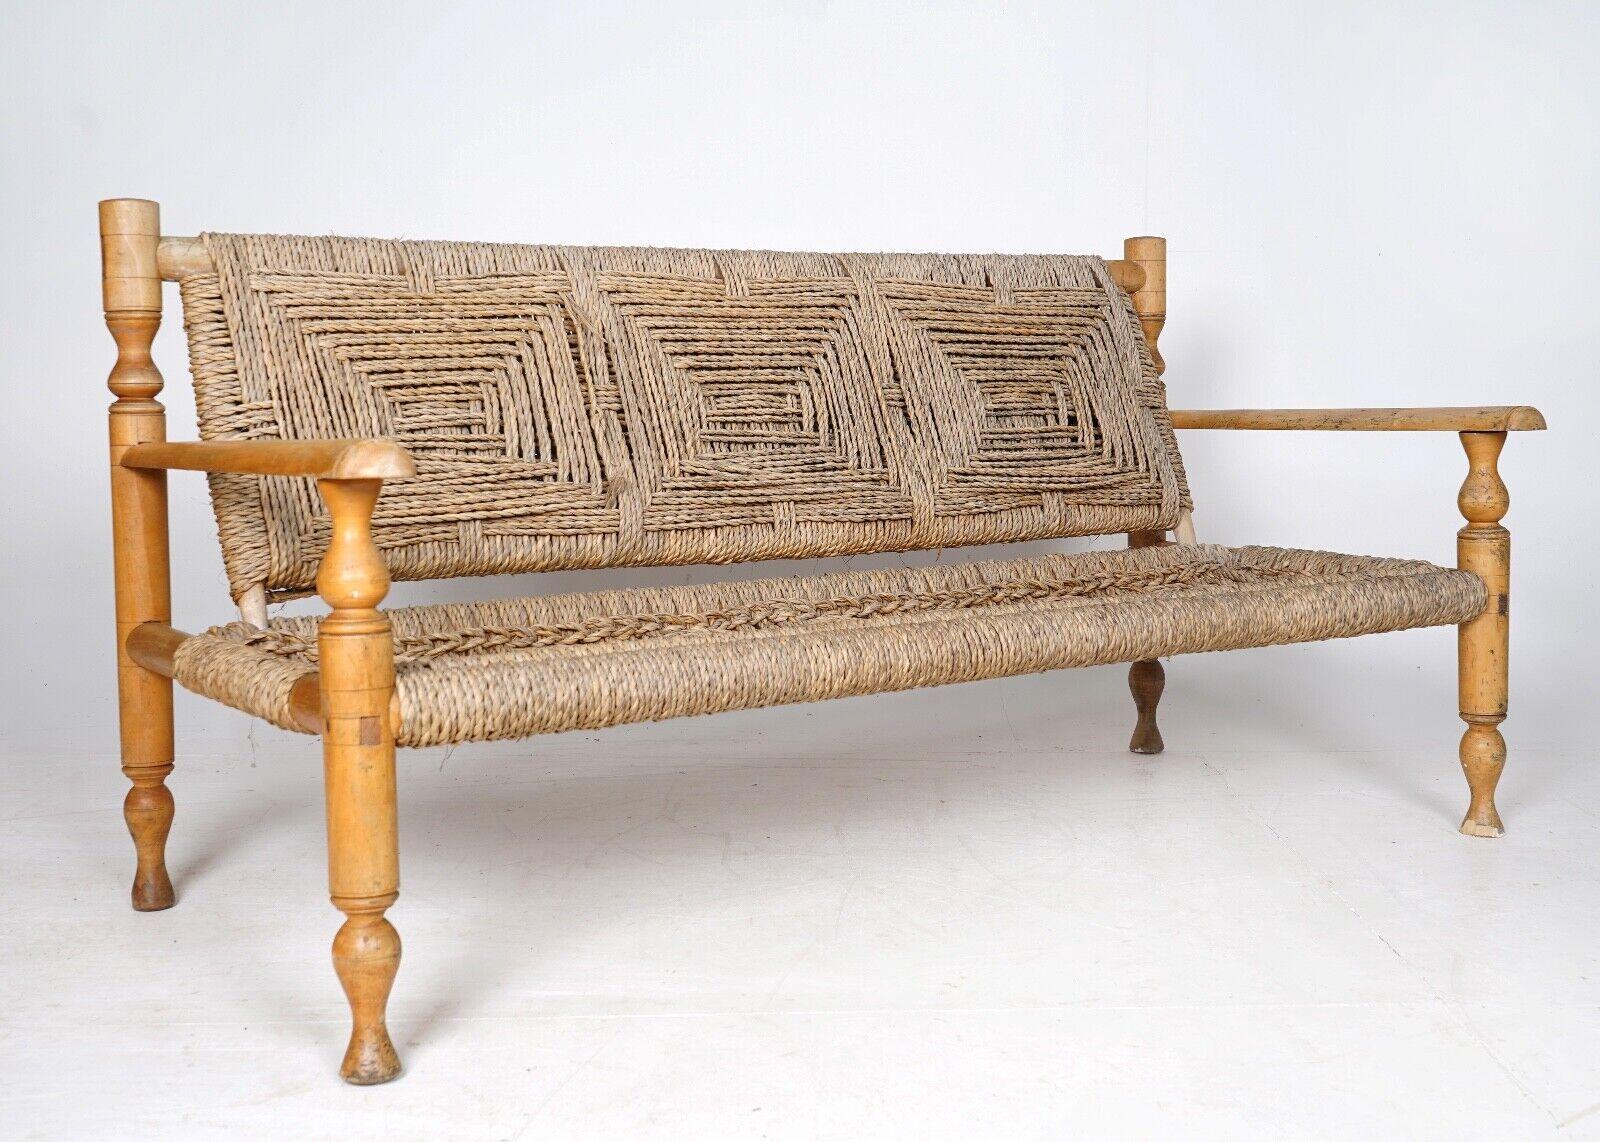 1950's French Bench by Adrien Audoux and Frida Minnet - Hemp Rope Seat  4